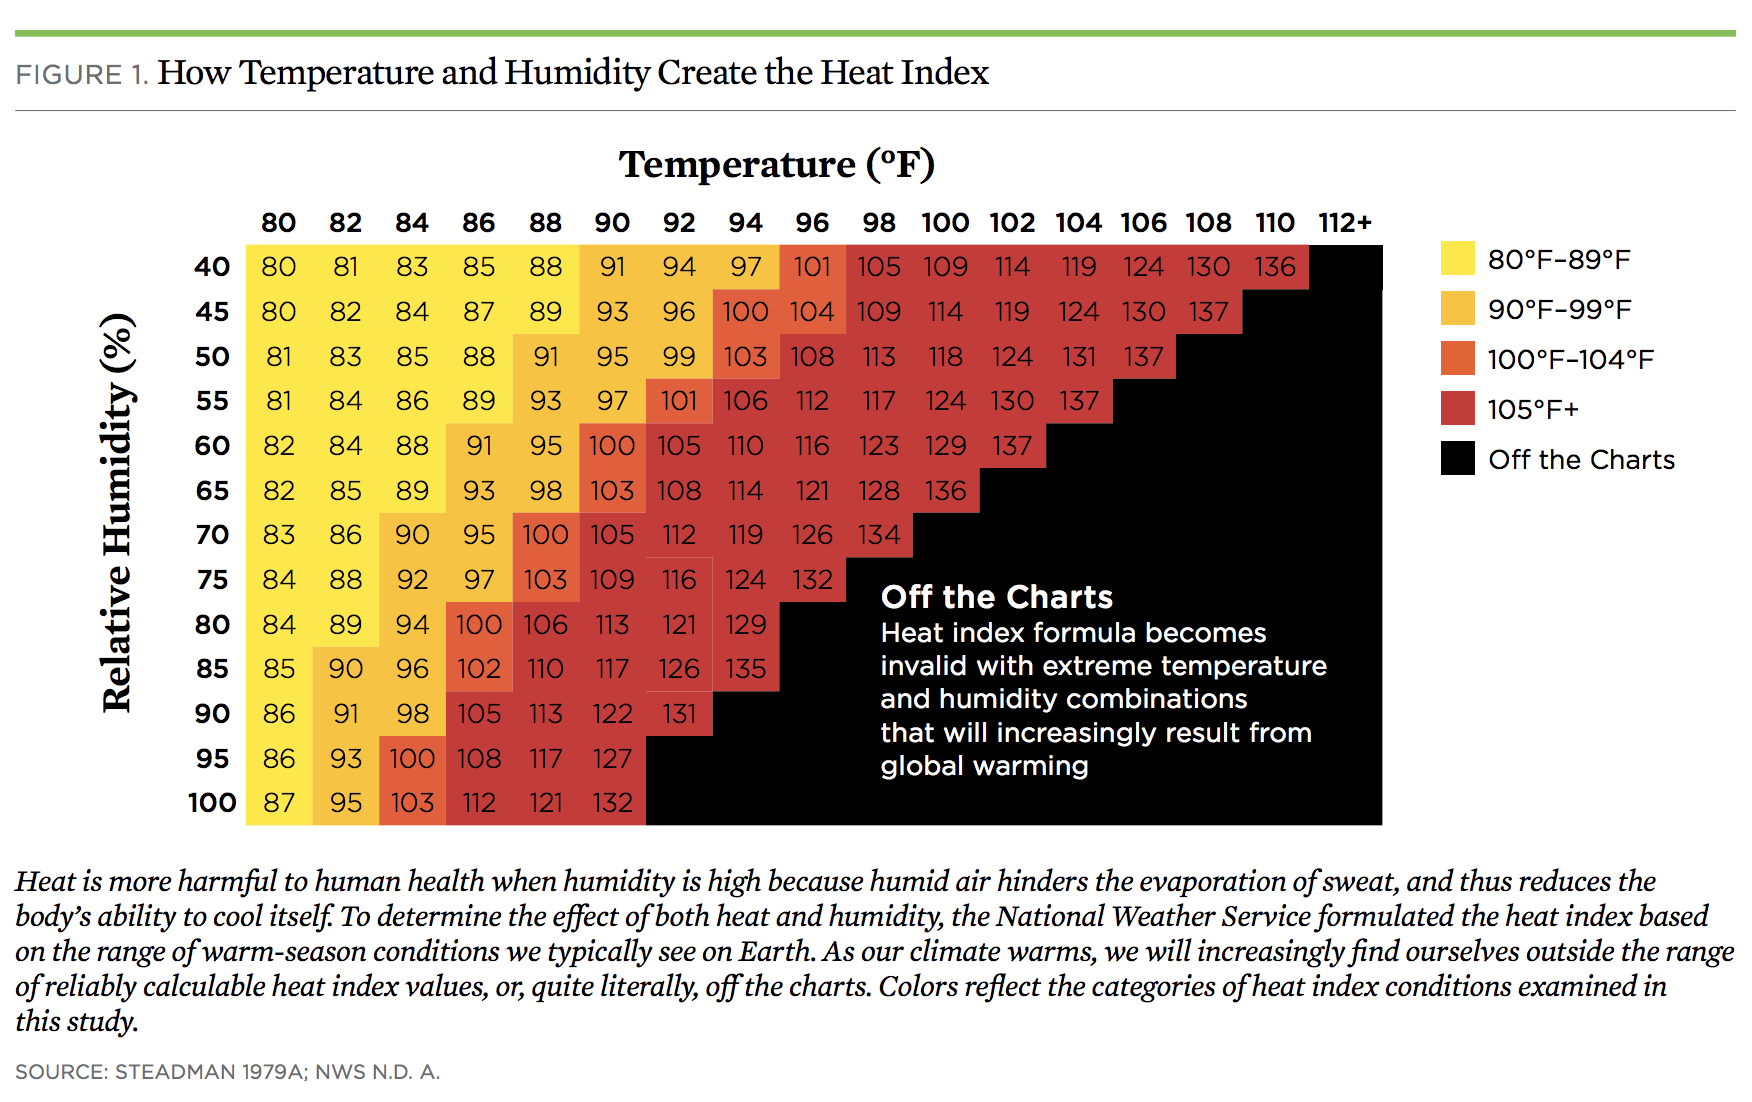 How Temperature and Humidity Create the Heat Index